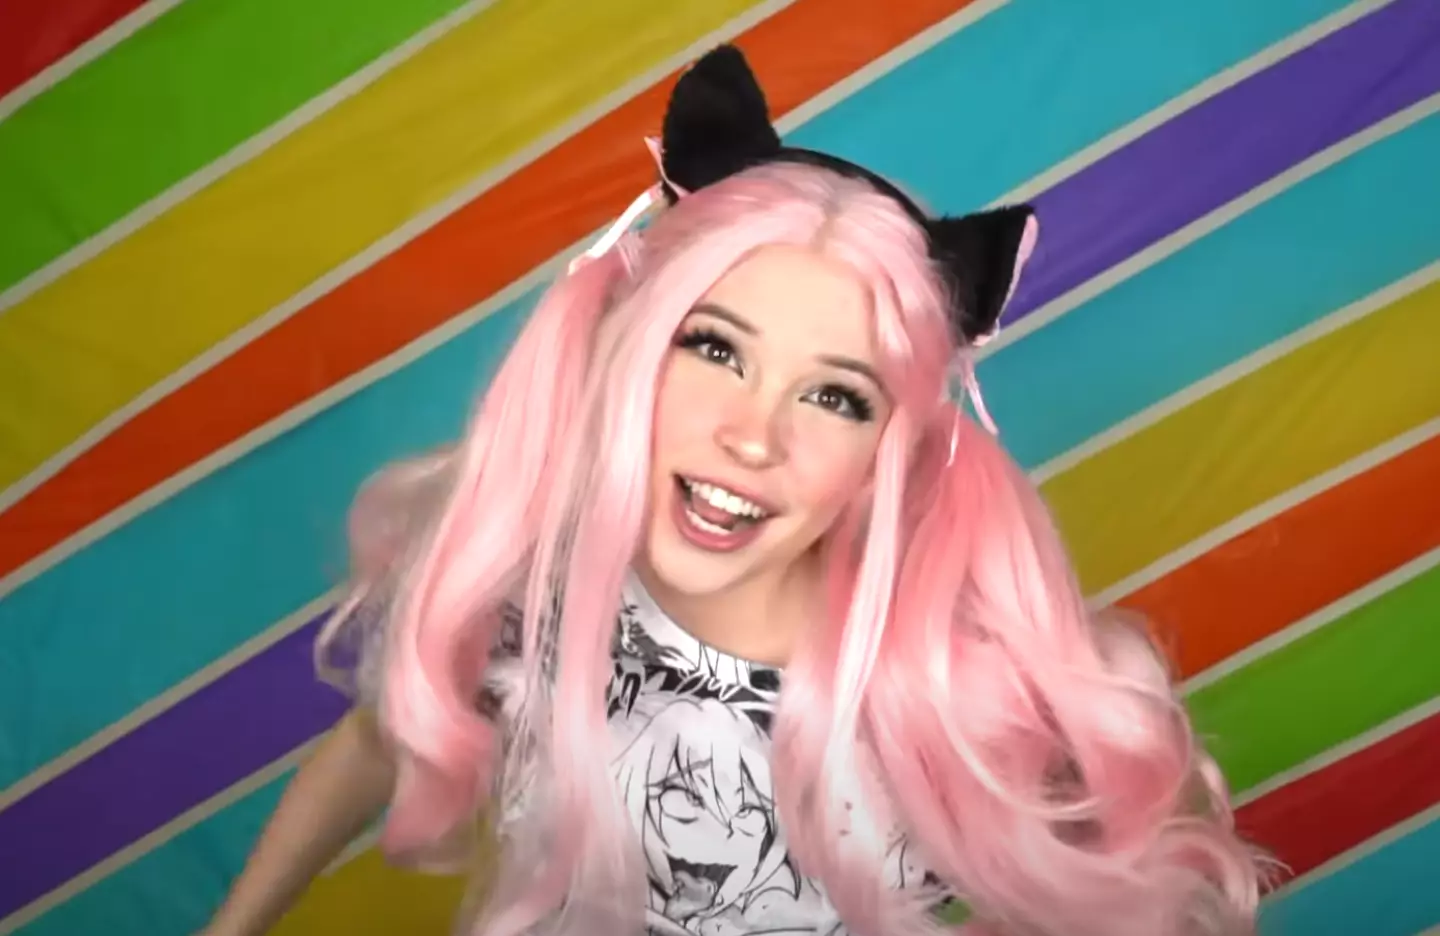 Belle Delphine has made millions from her adult content.